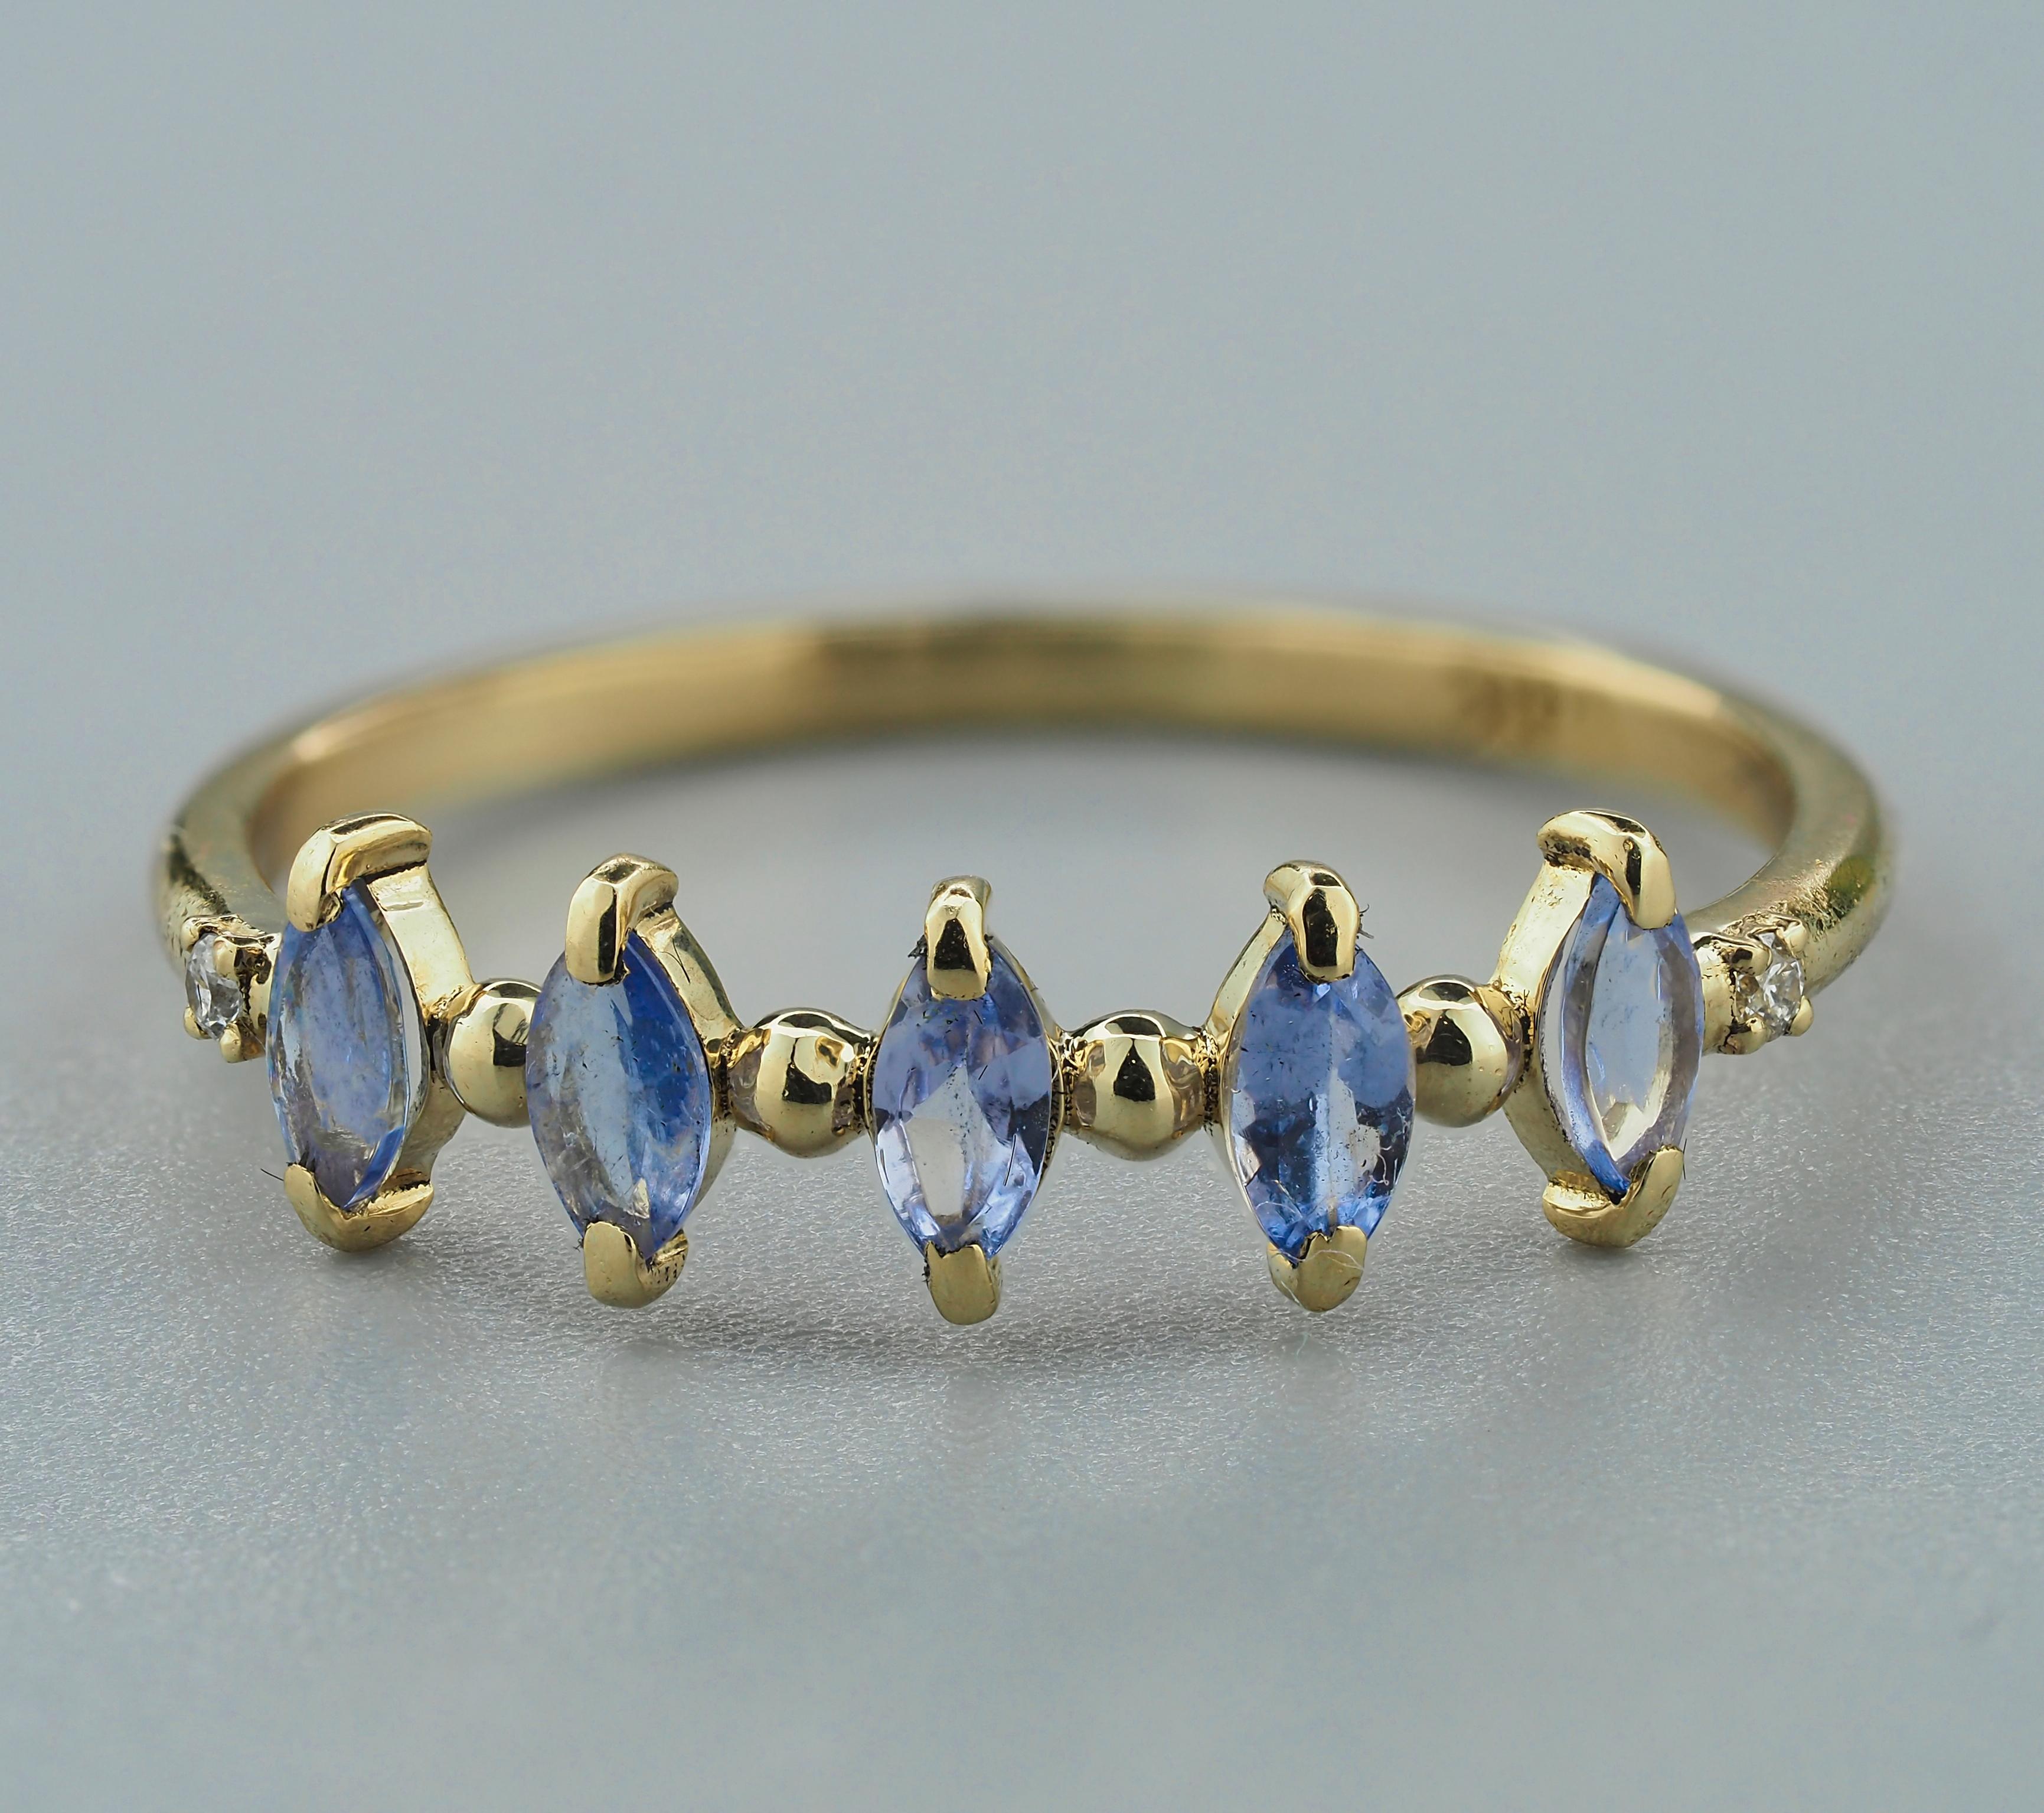 For Sale:  14k Gold Half Eternity Ring with Tanzanite and Diamonds 6